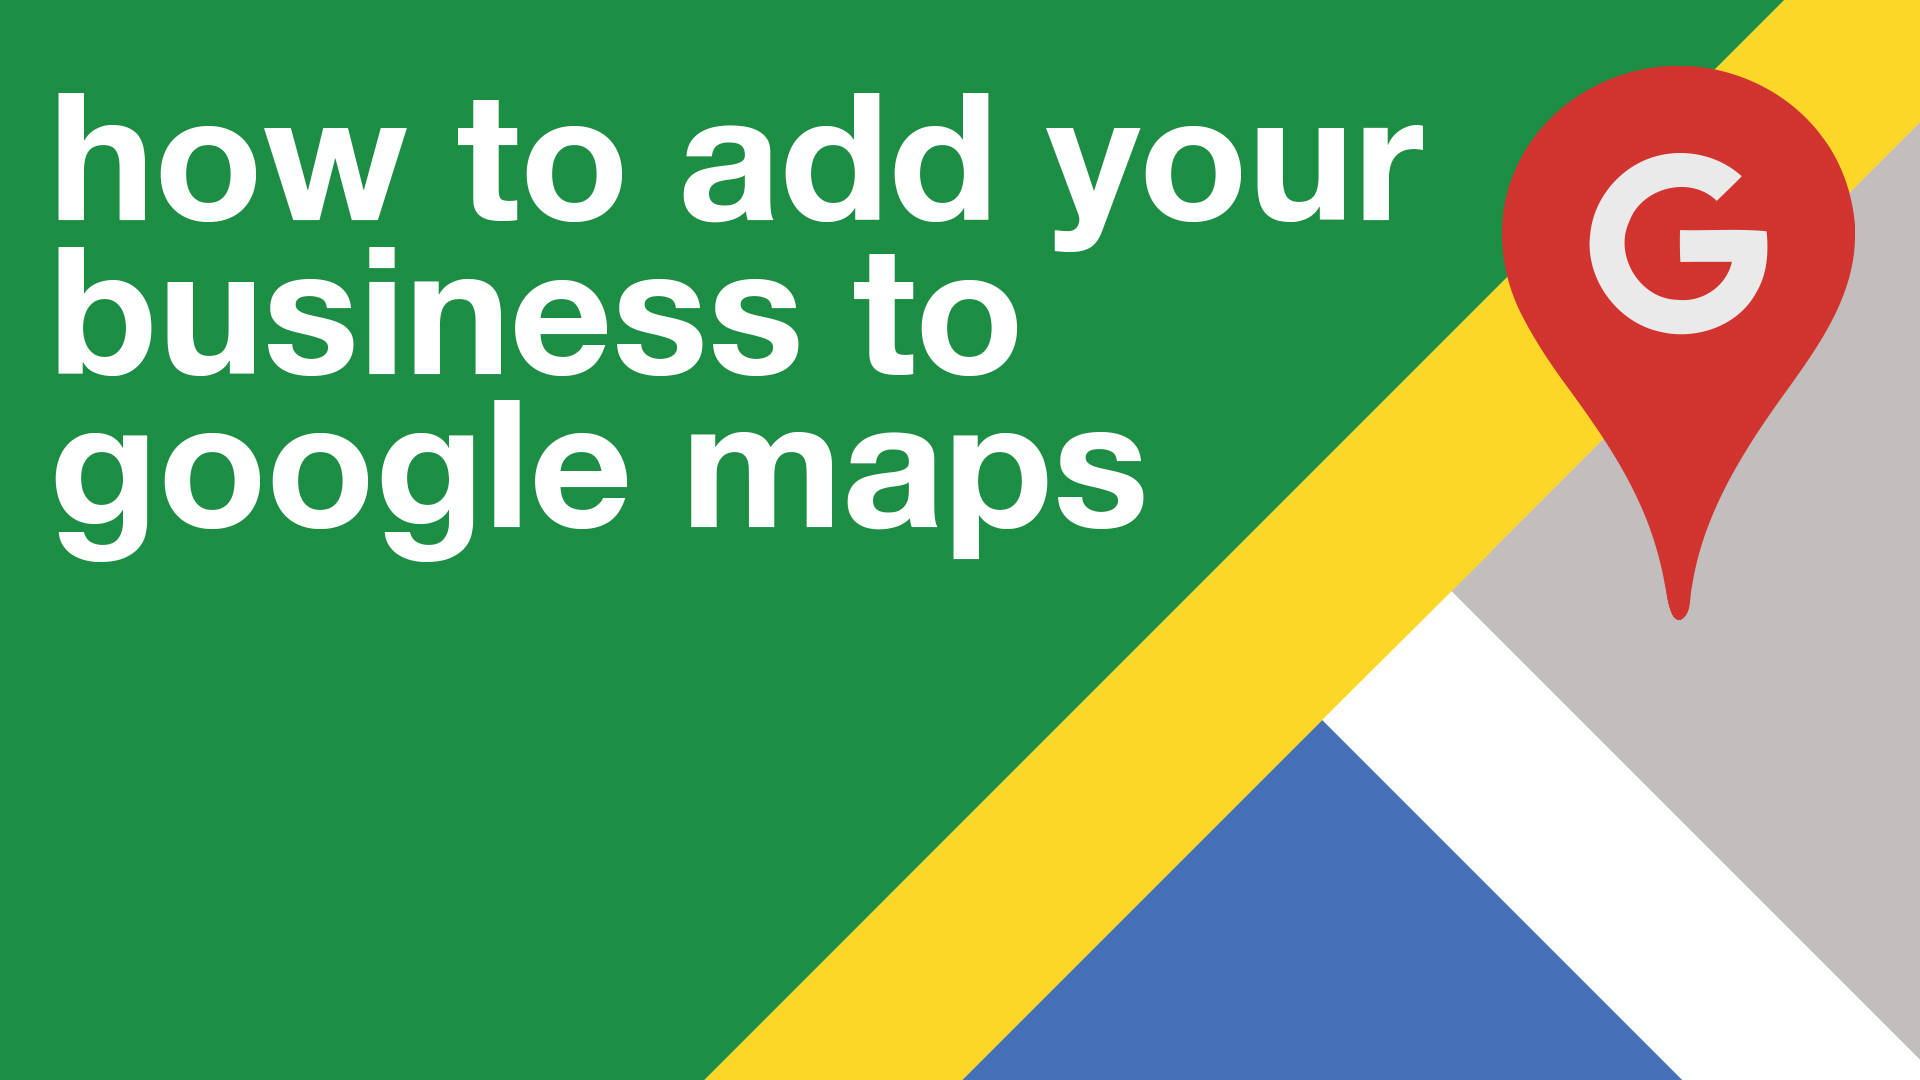 download google maps business